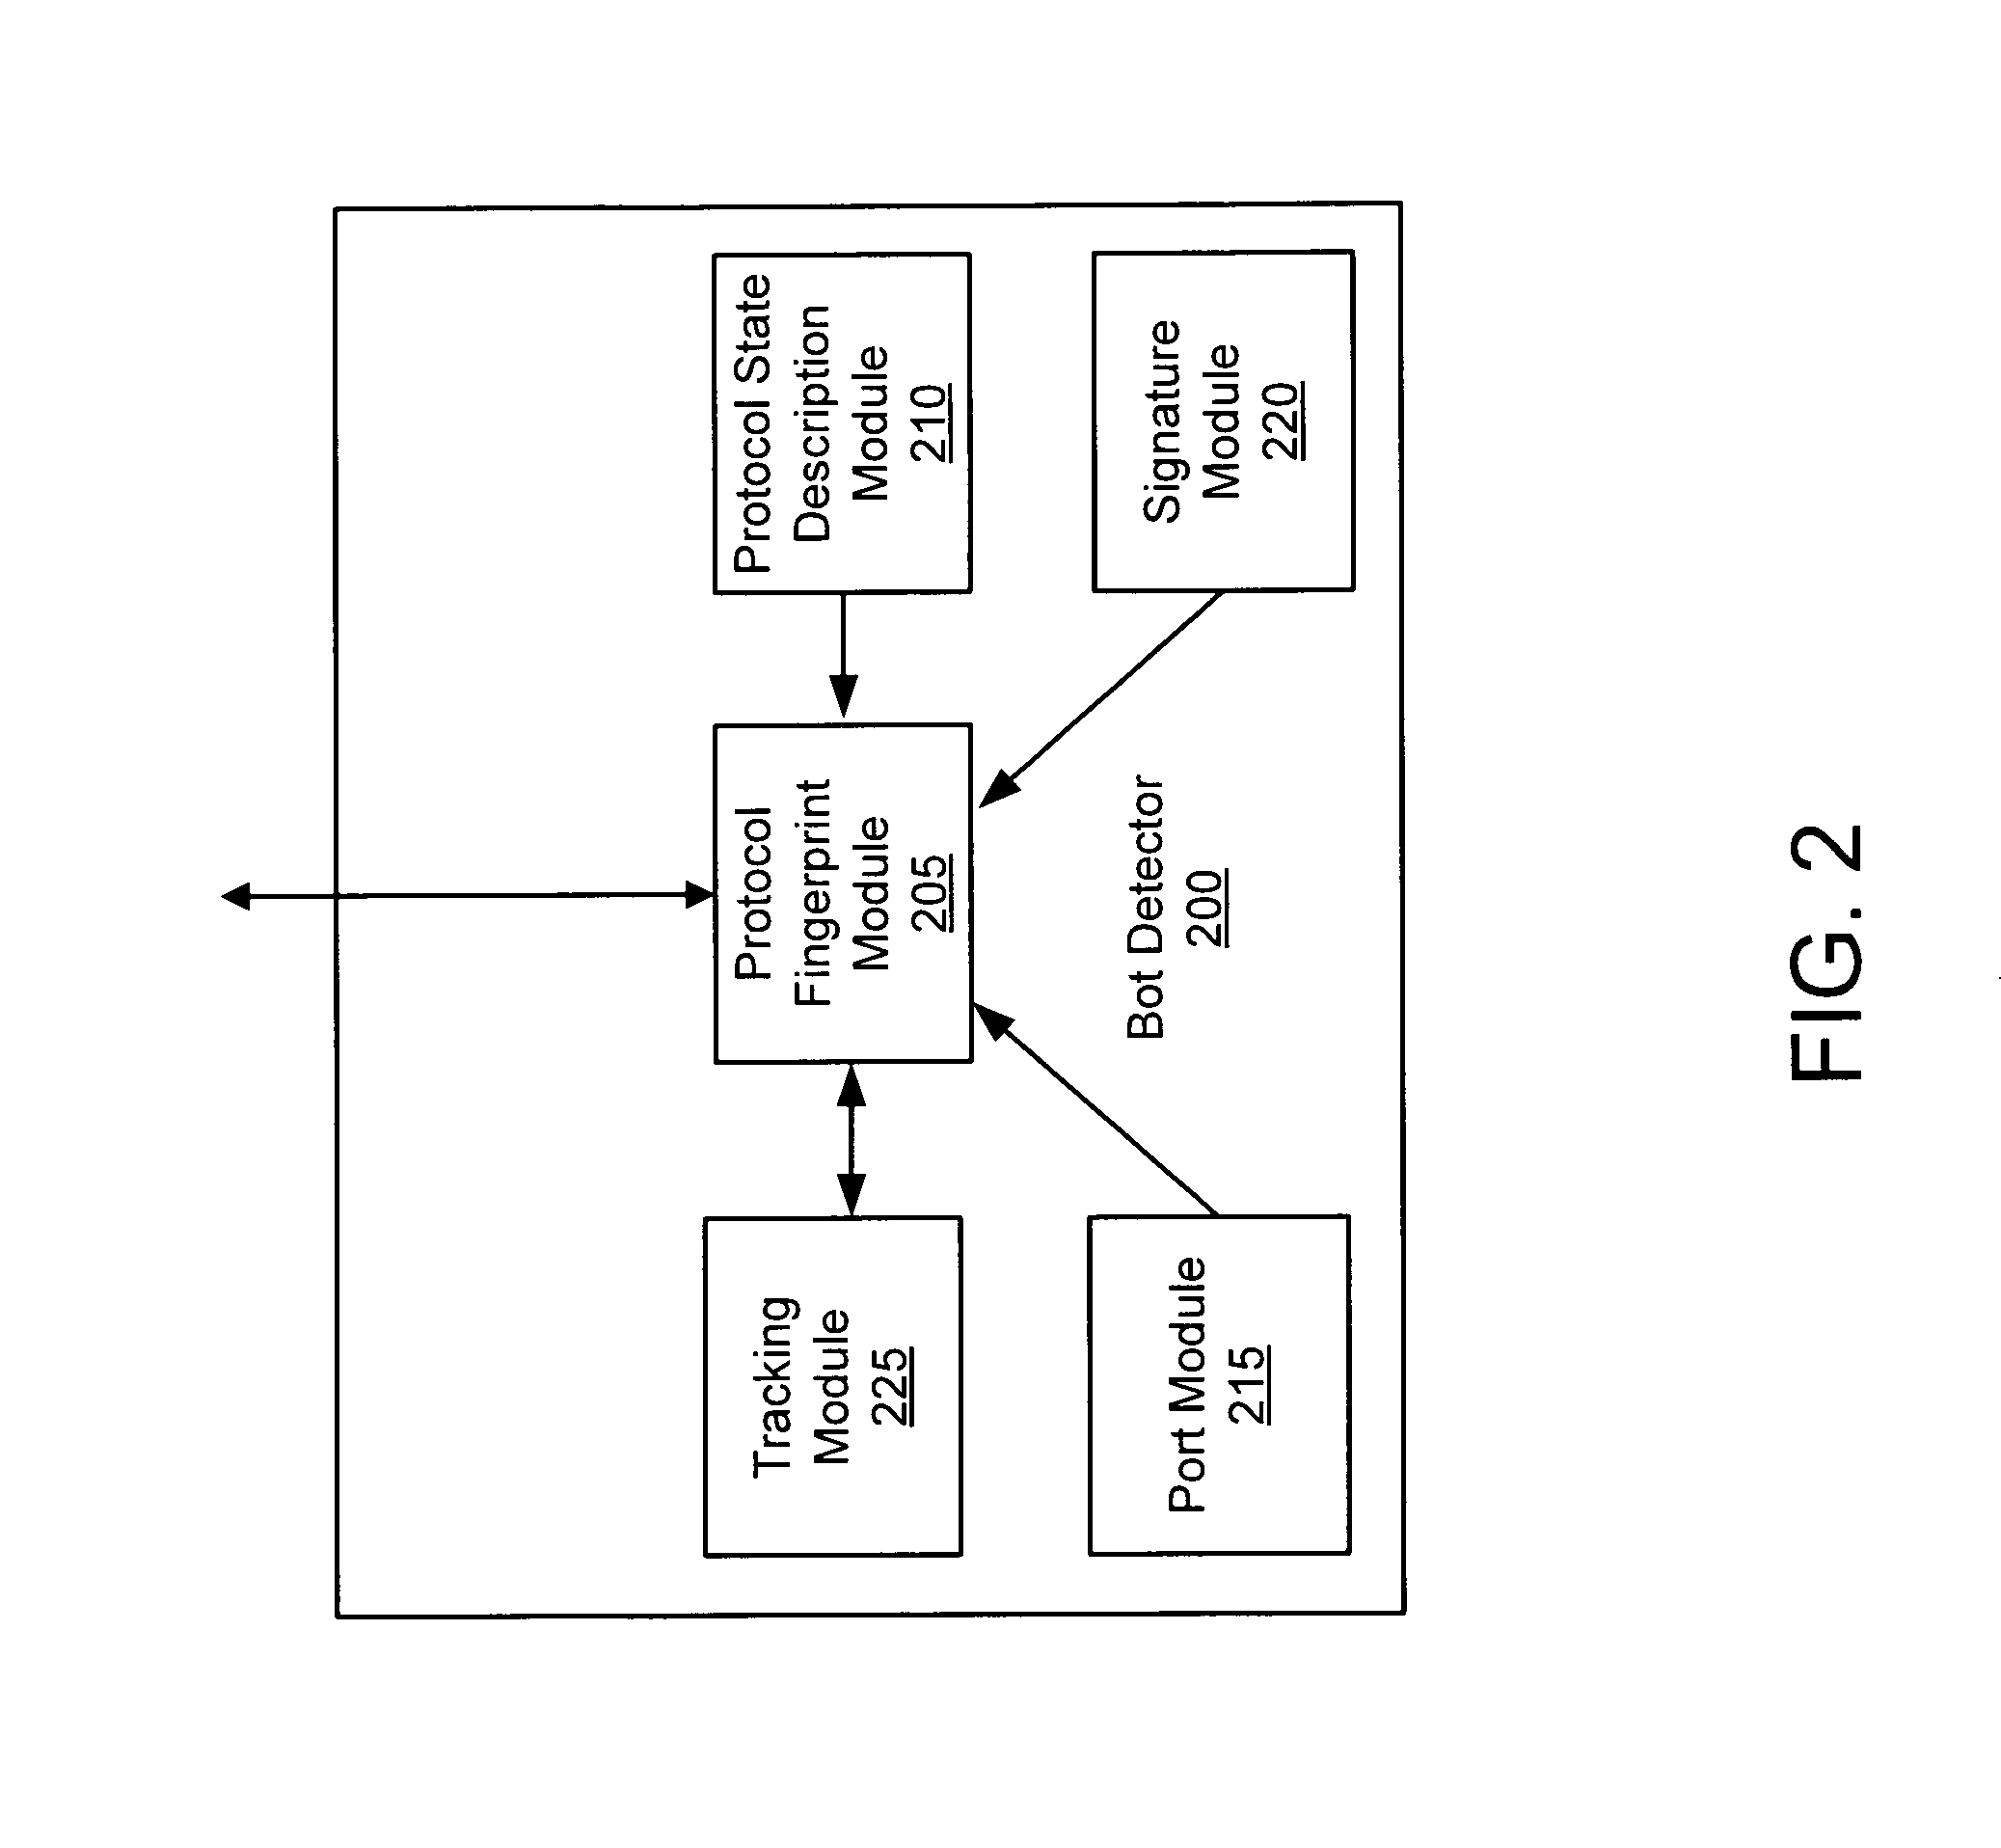 Systems and methods for detecting communication channels of bots